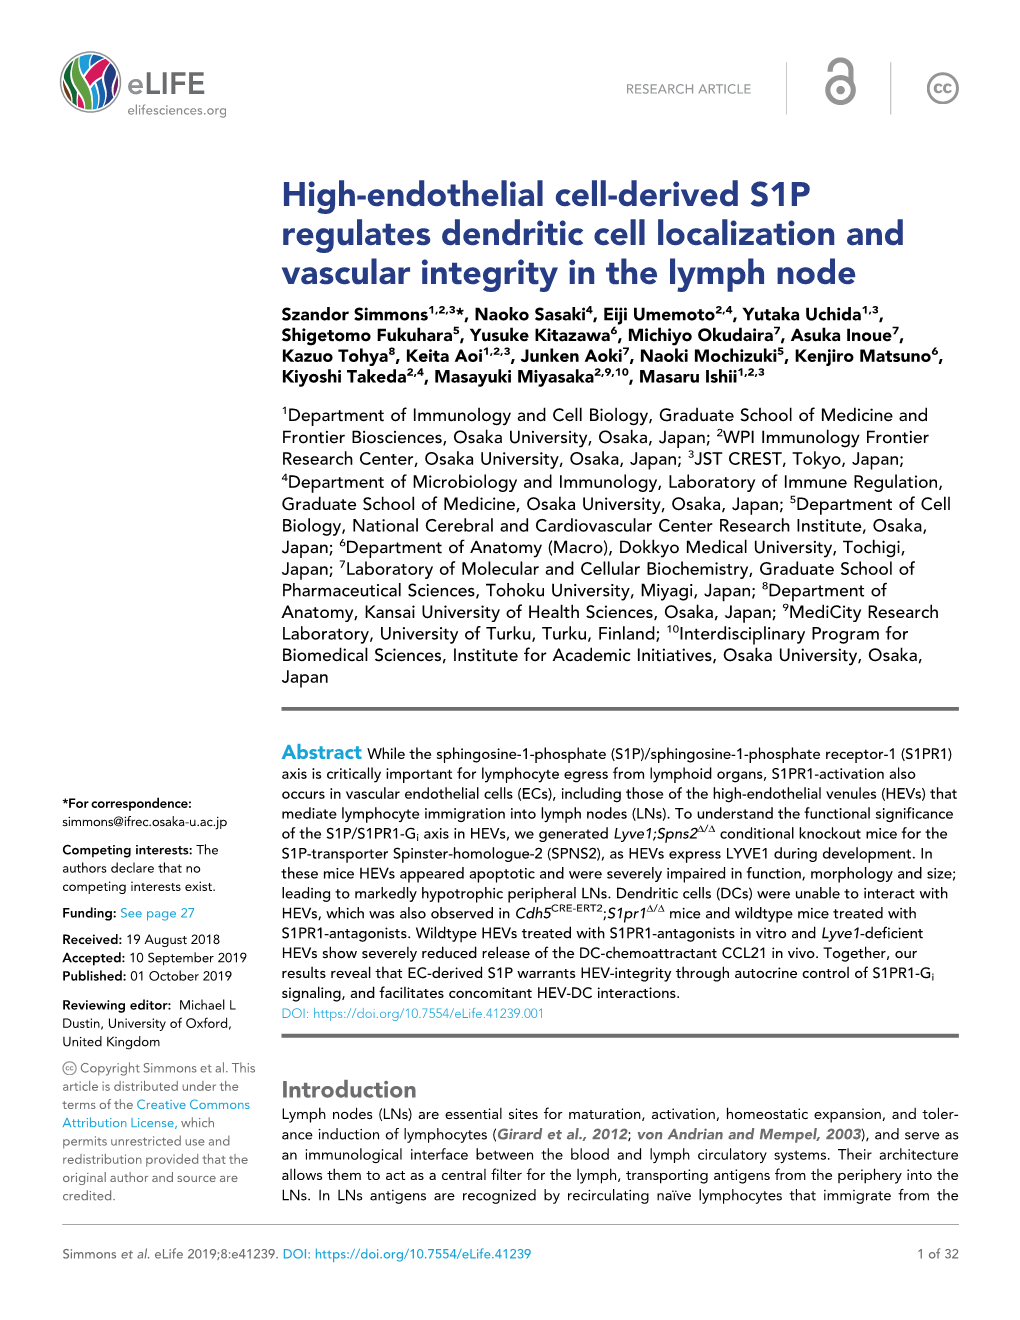 High-Endothelial Cell-Derived S1P Regulates Dendritic Cell Localization